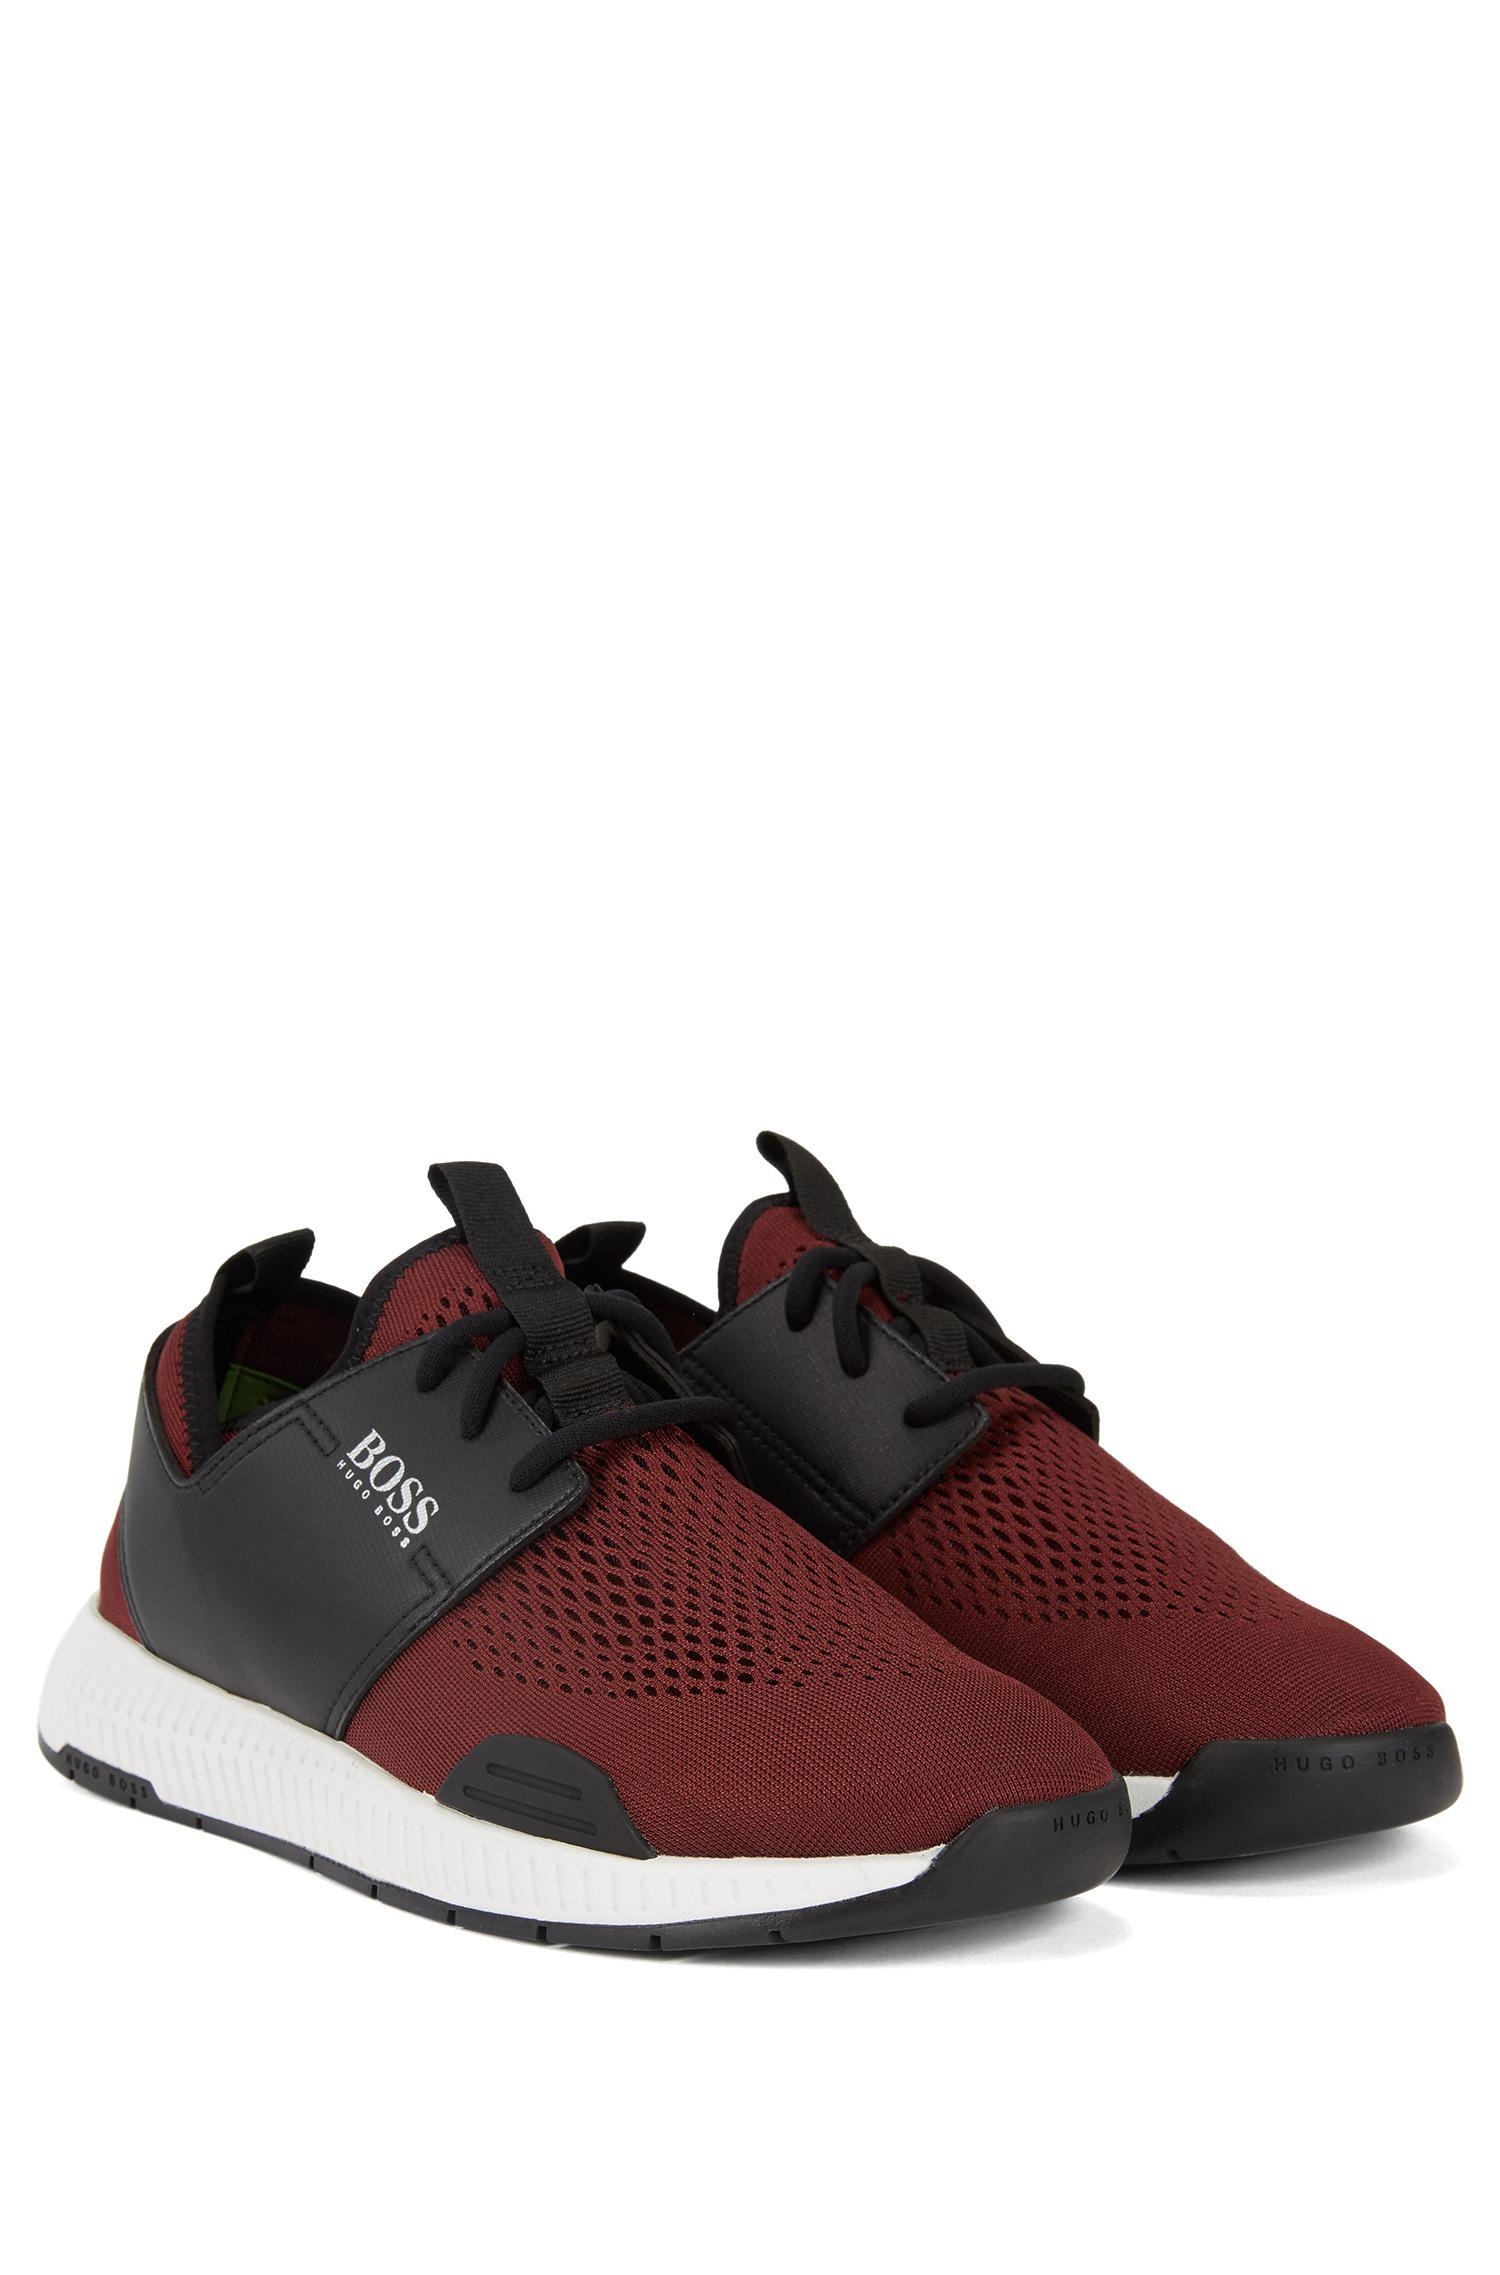 BOSS by Hugo Boss Synthetic Running-inspired Sneakers With Mesh Uppers ...